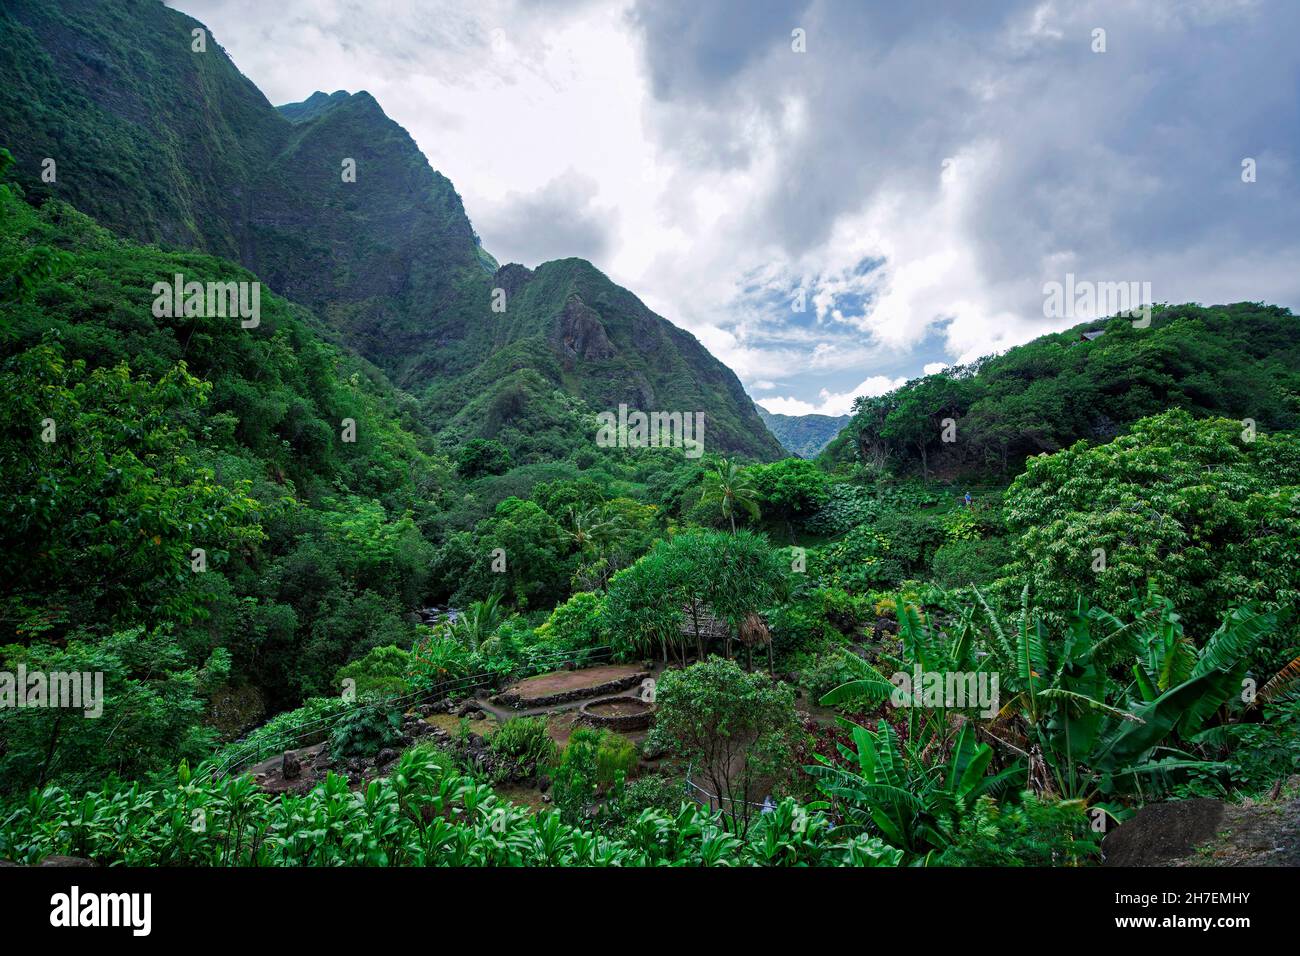 Parc national de IAO Valley, Iao Valley, West Maui, Hawaii Banque D'Images